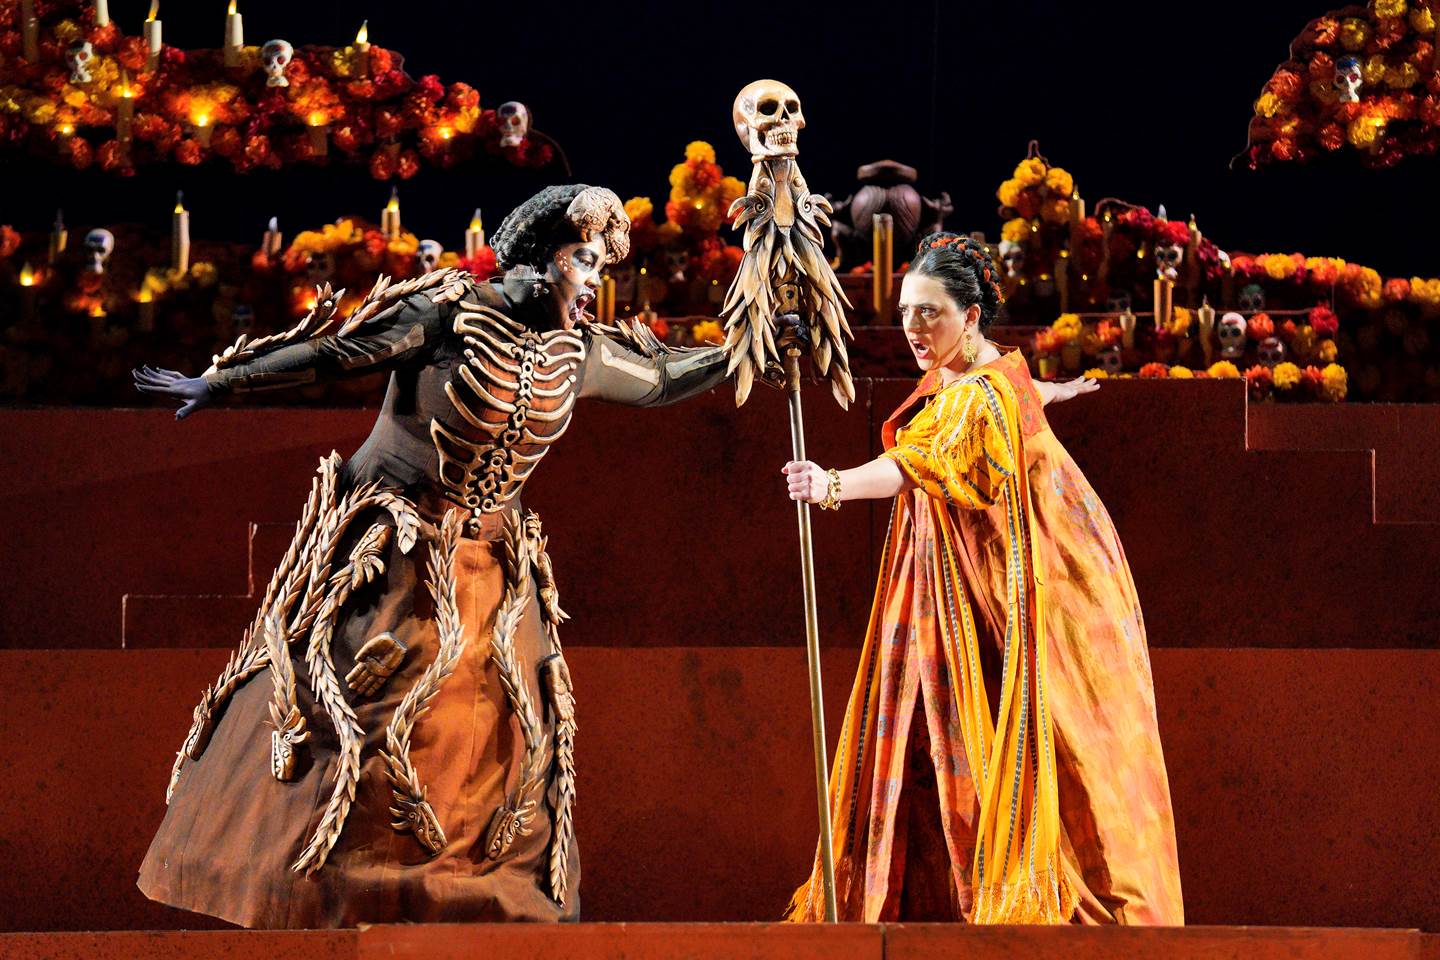 Scene from Frida of a woman in orange dress and a skeleton both holding onto a stick with a skull on top